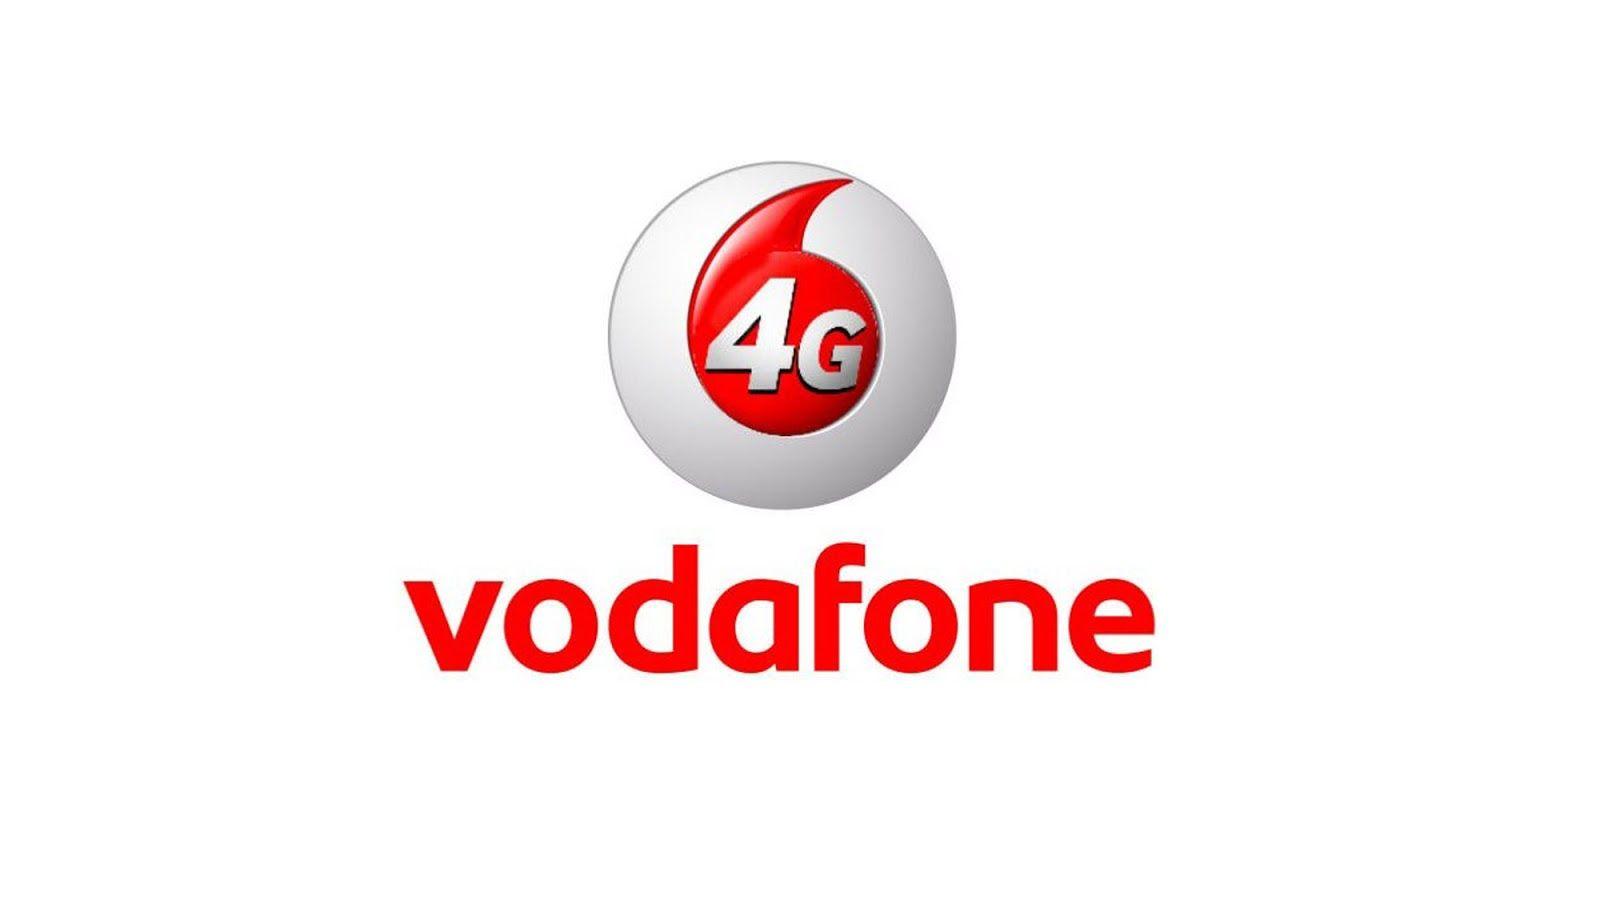 Vodafone launches 4G services in Rajkot and Morbi, Offers 20 GB